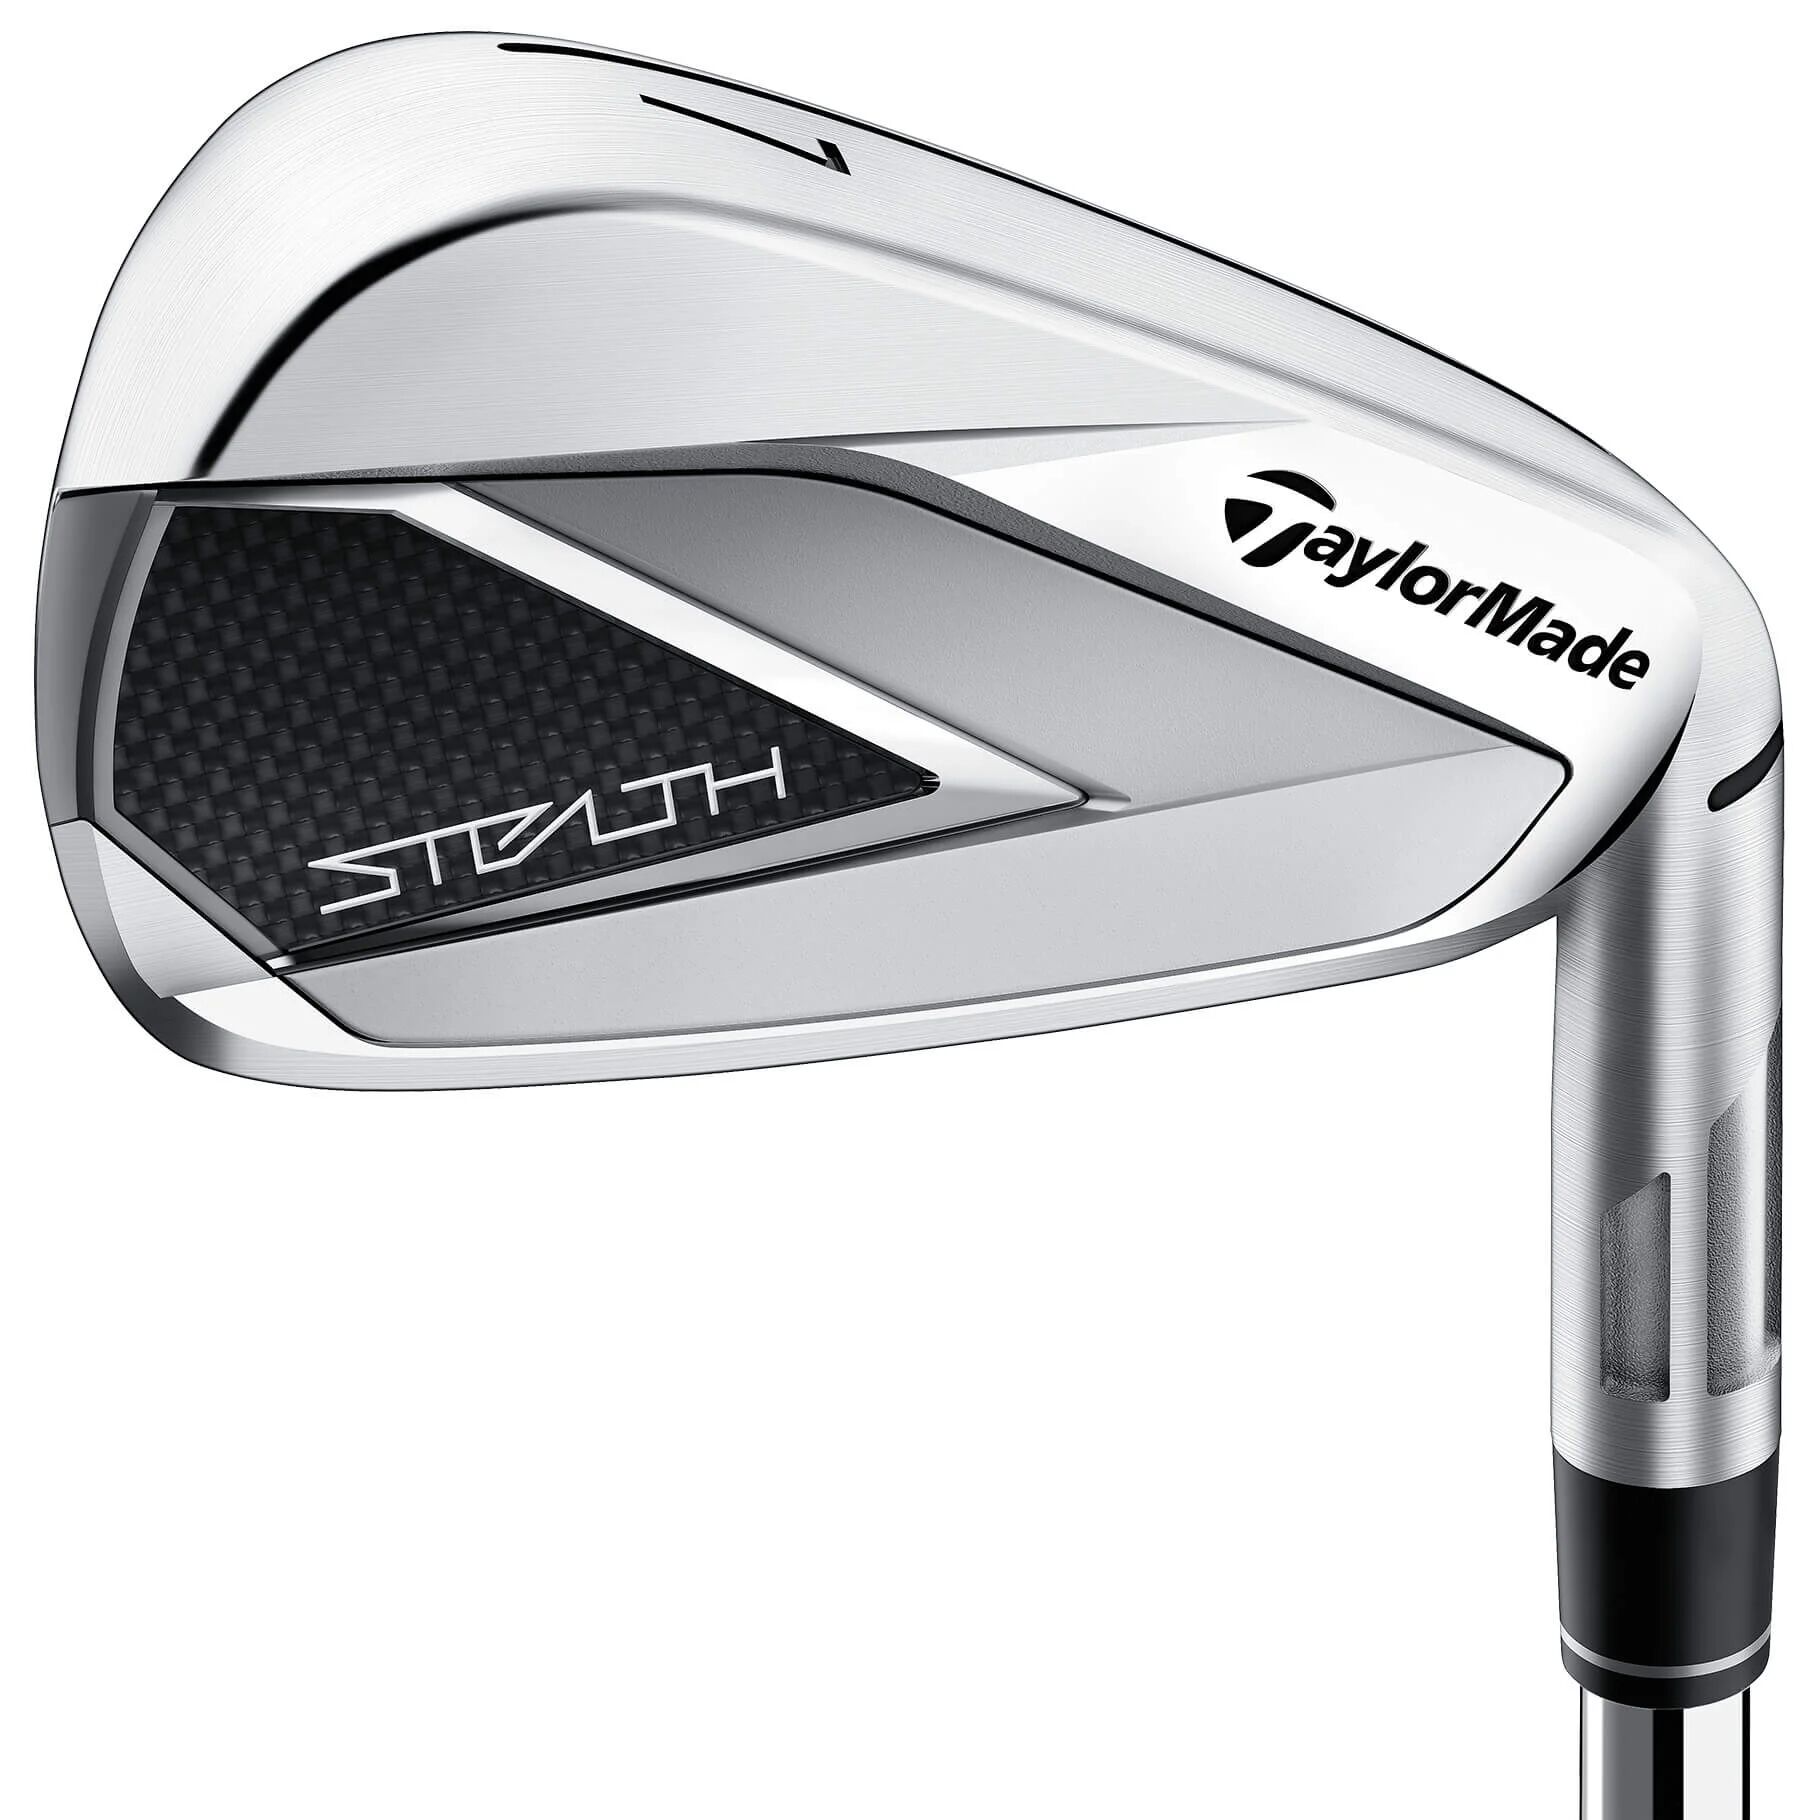 TaylorMade Stealth Irons - 5-PW,AW - SENIOR - RIGHT - Golf Clubs